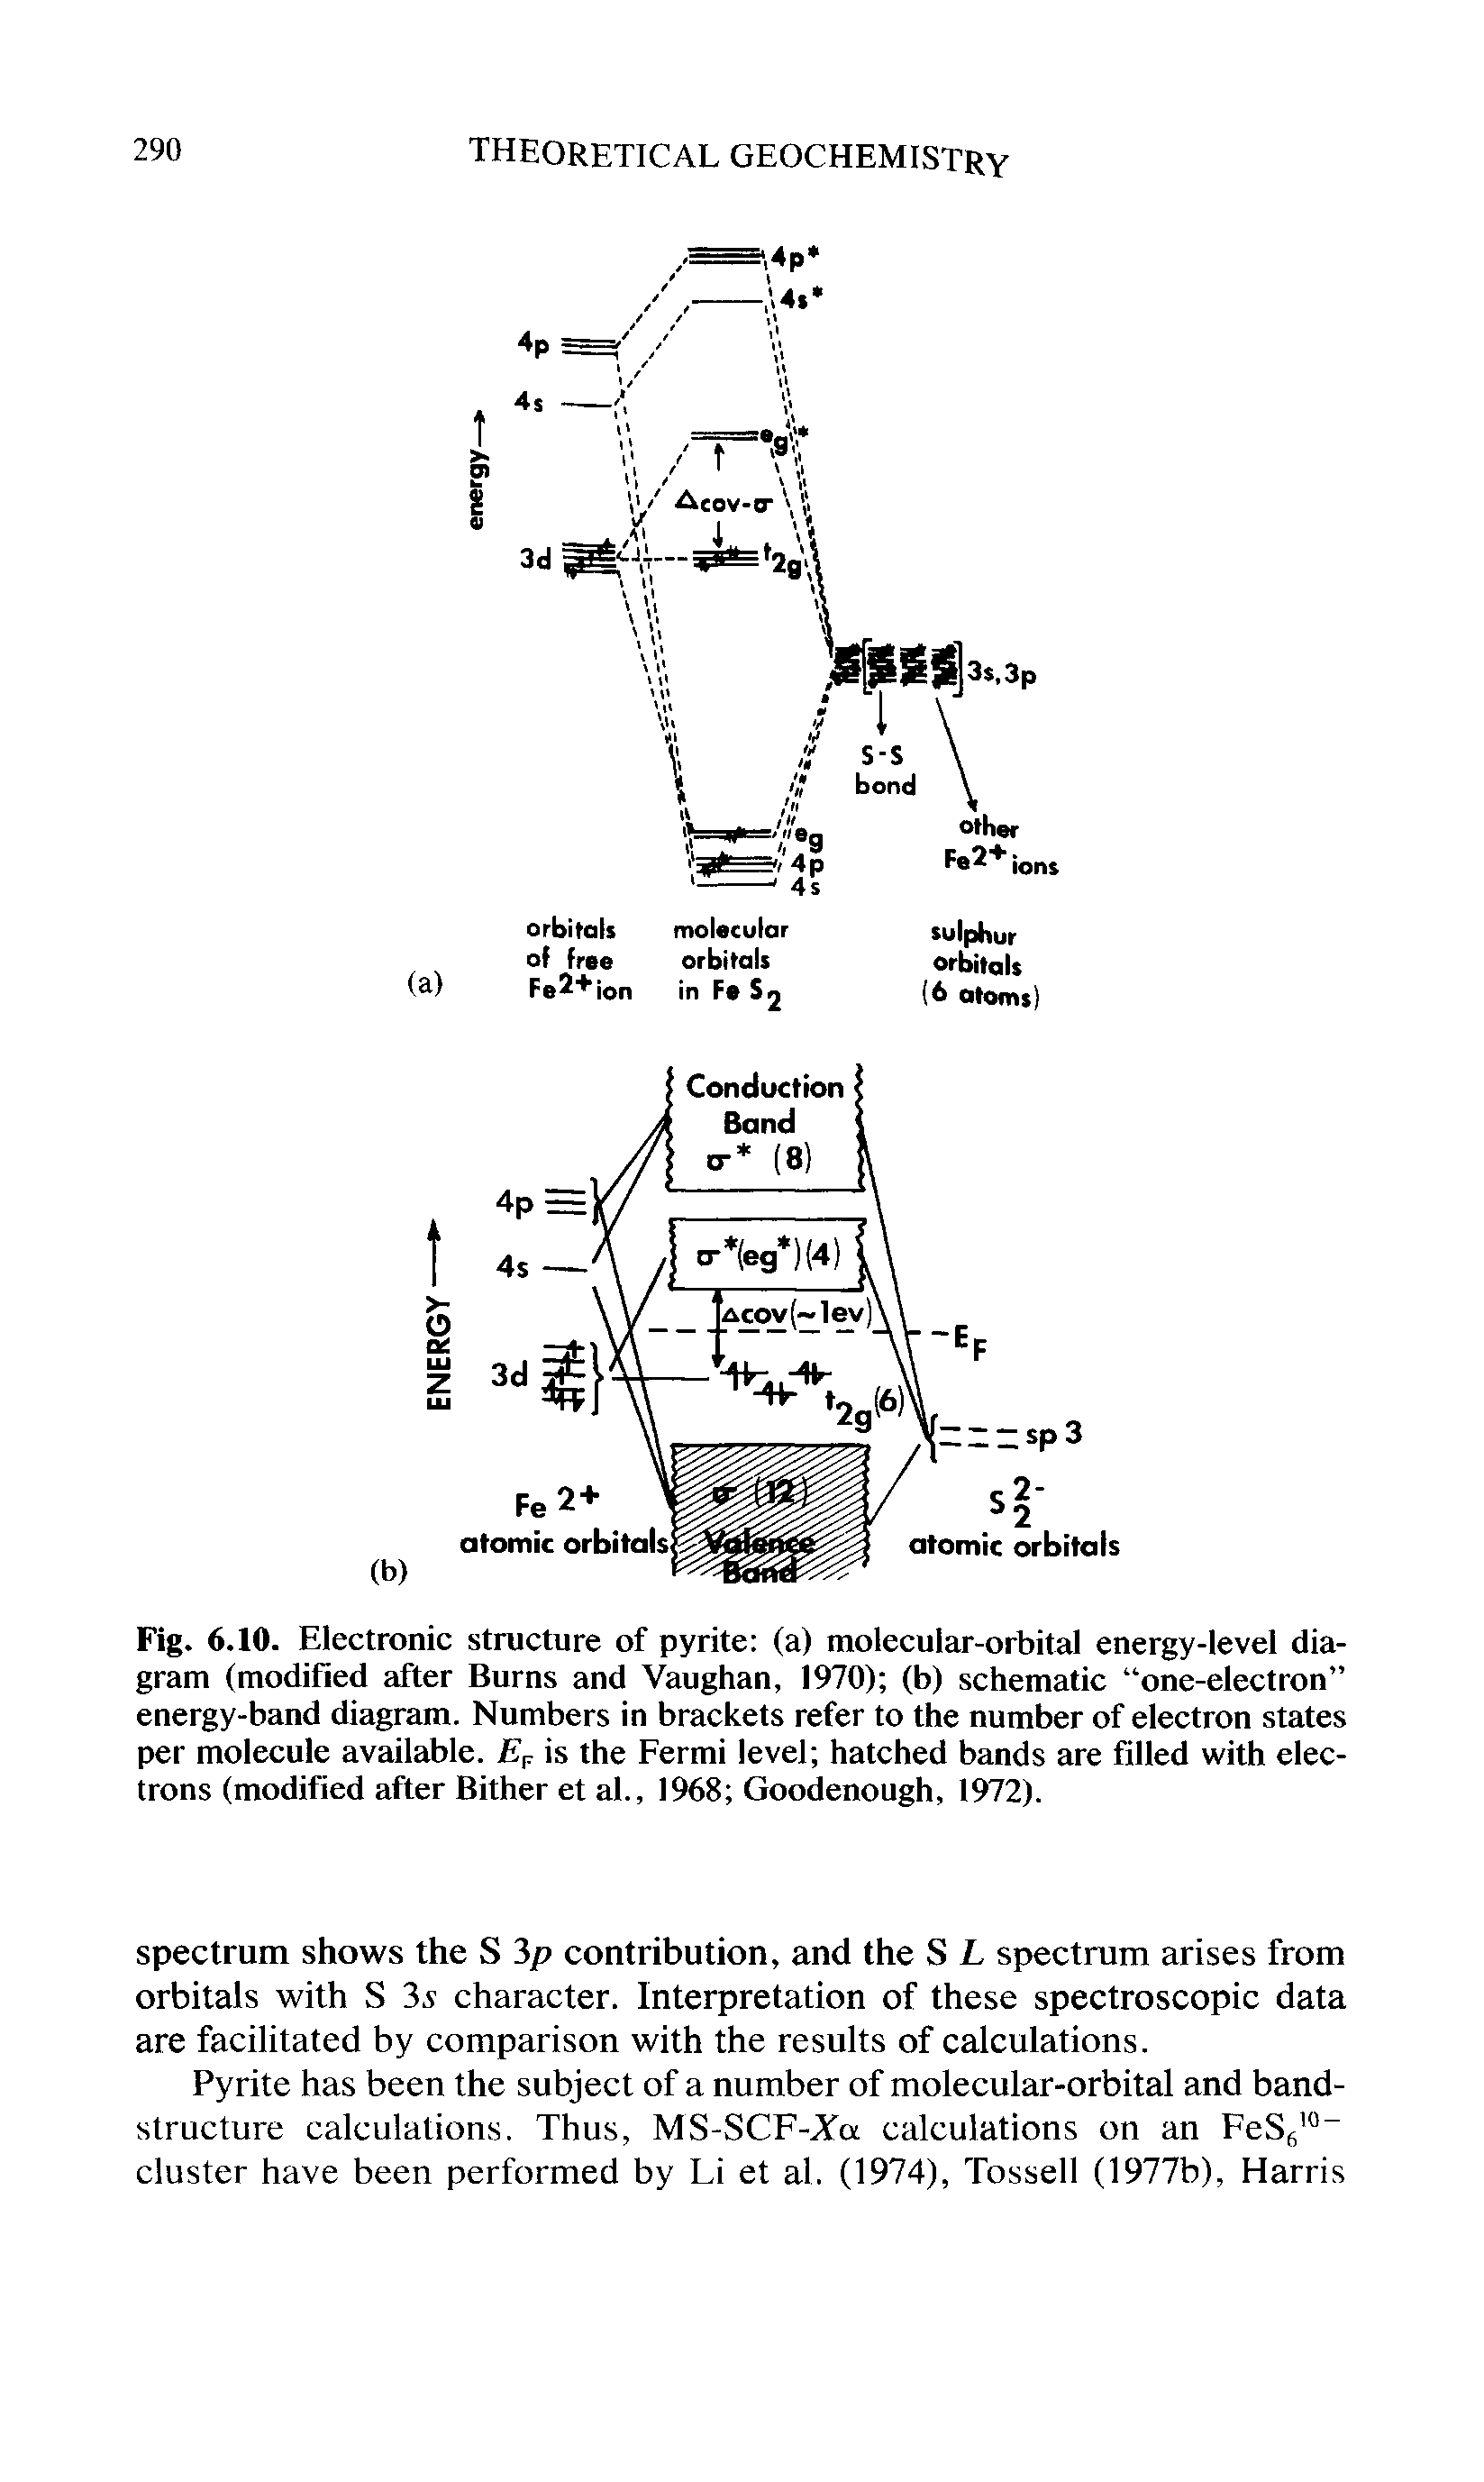 Fig. 6.10. Electronic structure of pyrite (a) molecular-orbital energy-level diagram (modified after Burns and Vaughan, 1970) (b) schematic one-electron energy-band diagram. Numbers in brackets refer to the number of electron states per molecule available. is the Fermi level hatched bands are filled with electrons (modified after Either et al., 1968 Goodenough, 1972).